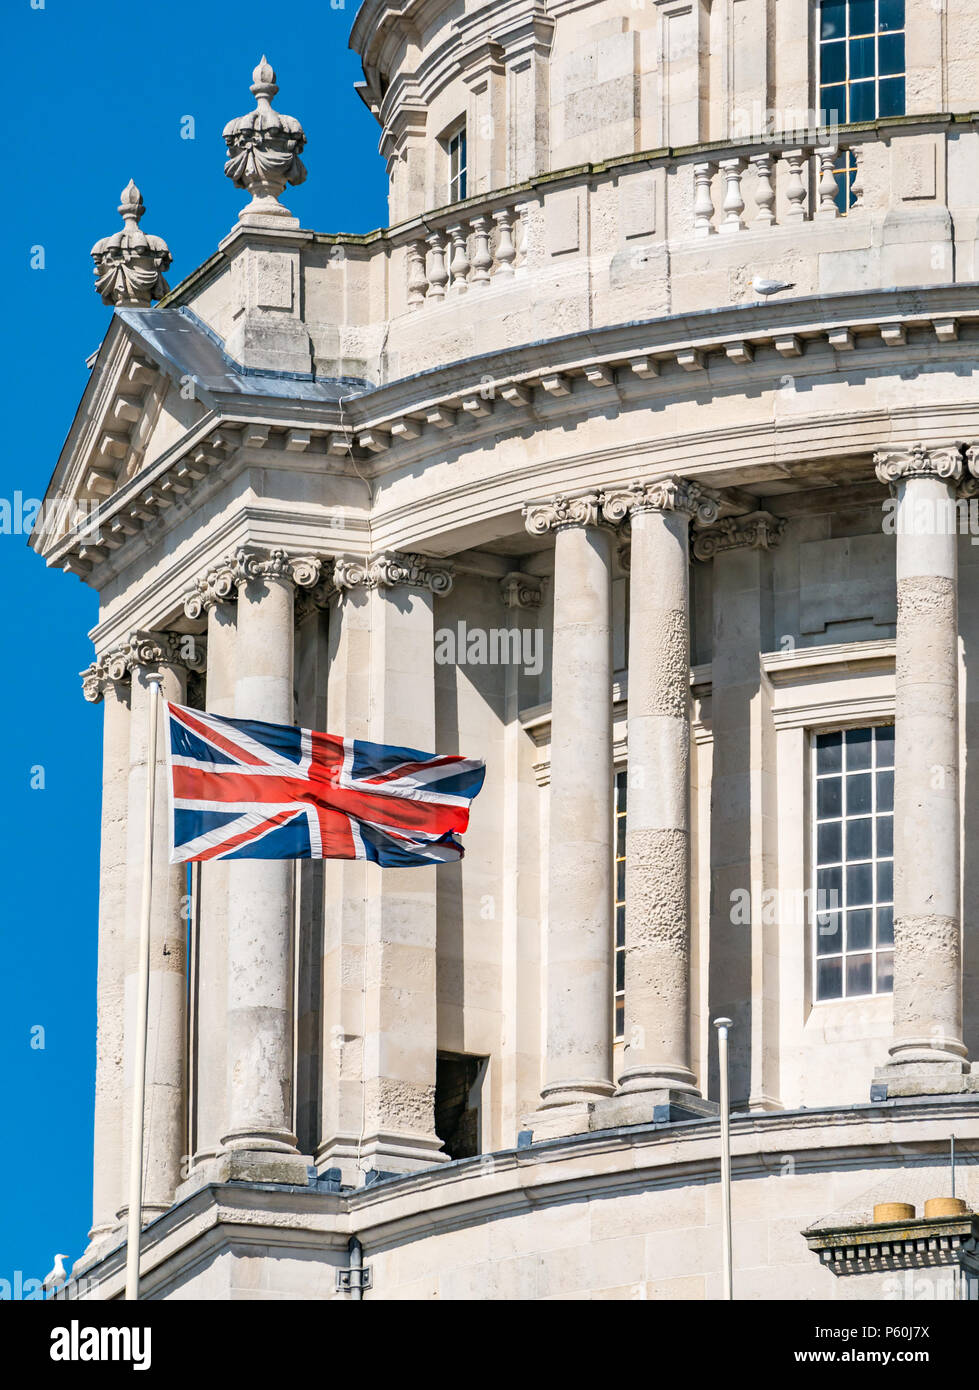 View of dome of Edwardian Baroque style of Liverpool building with Union Jack flag flying and blue sky Stock Photo